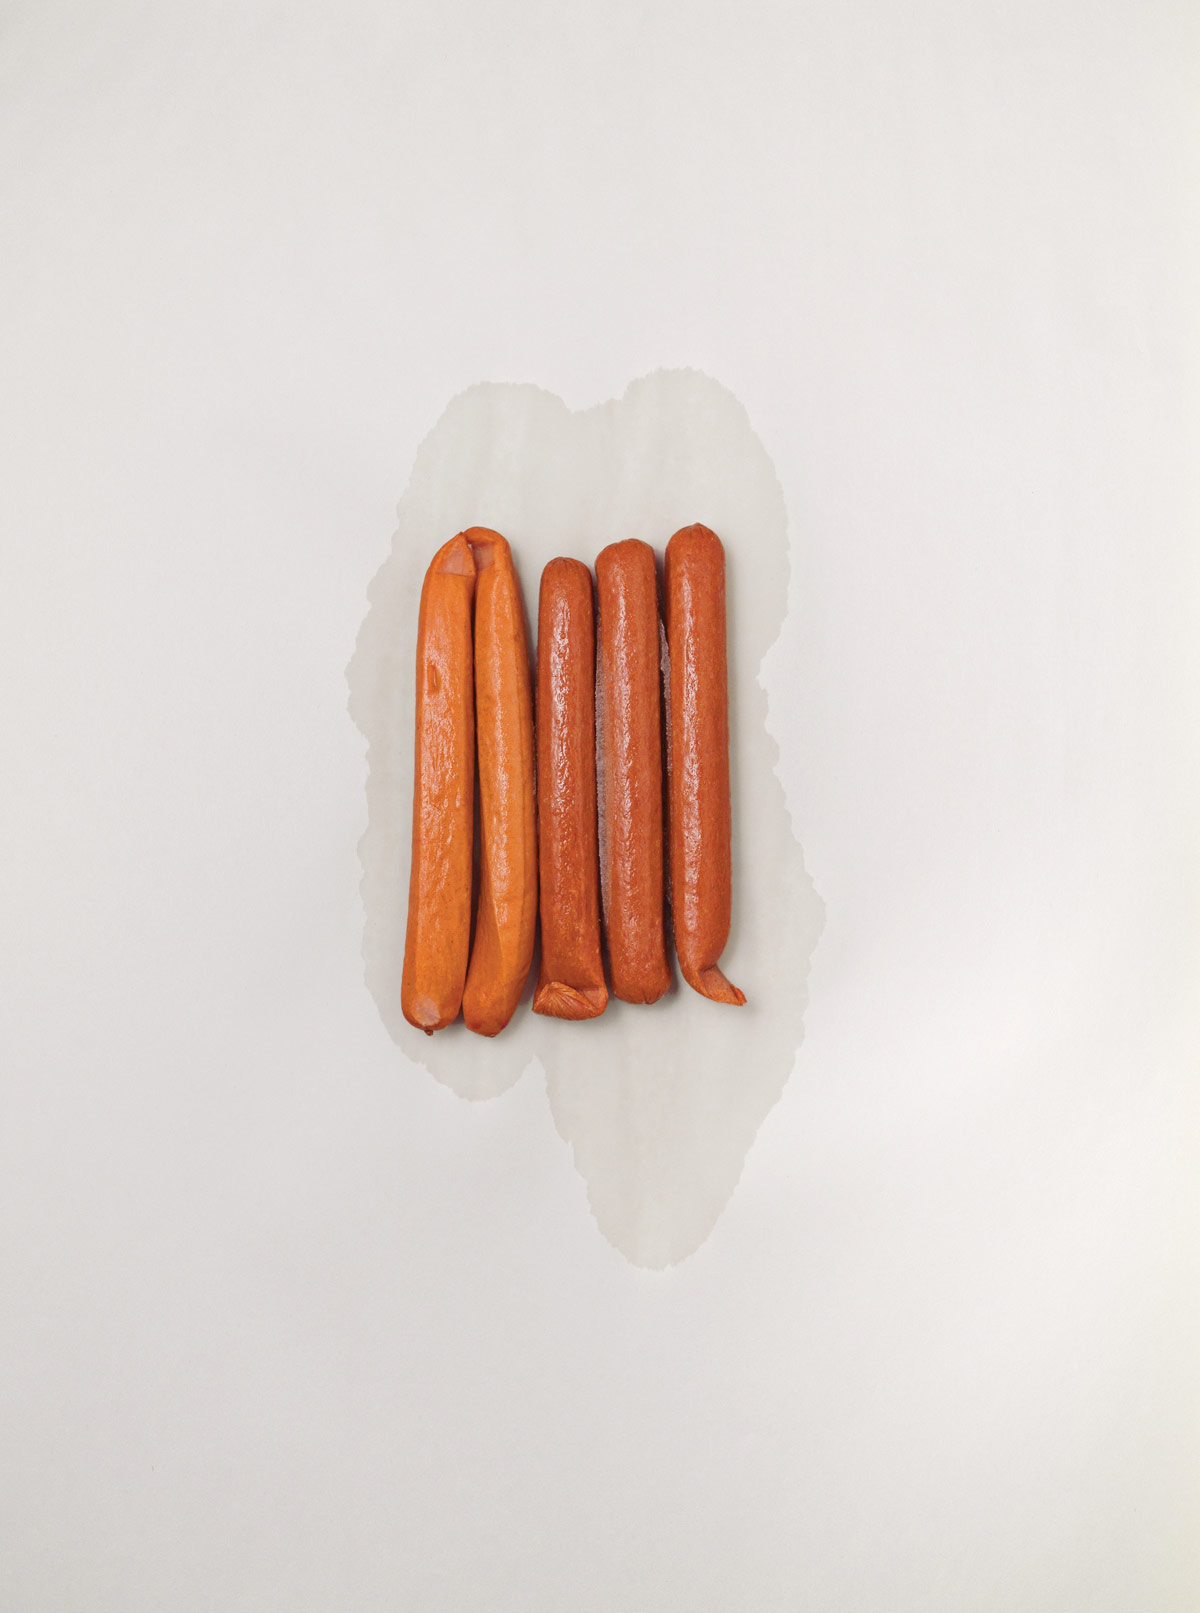 frozen hot dogs thawing